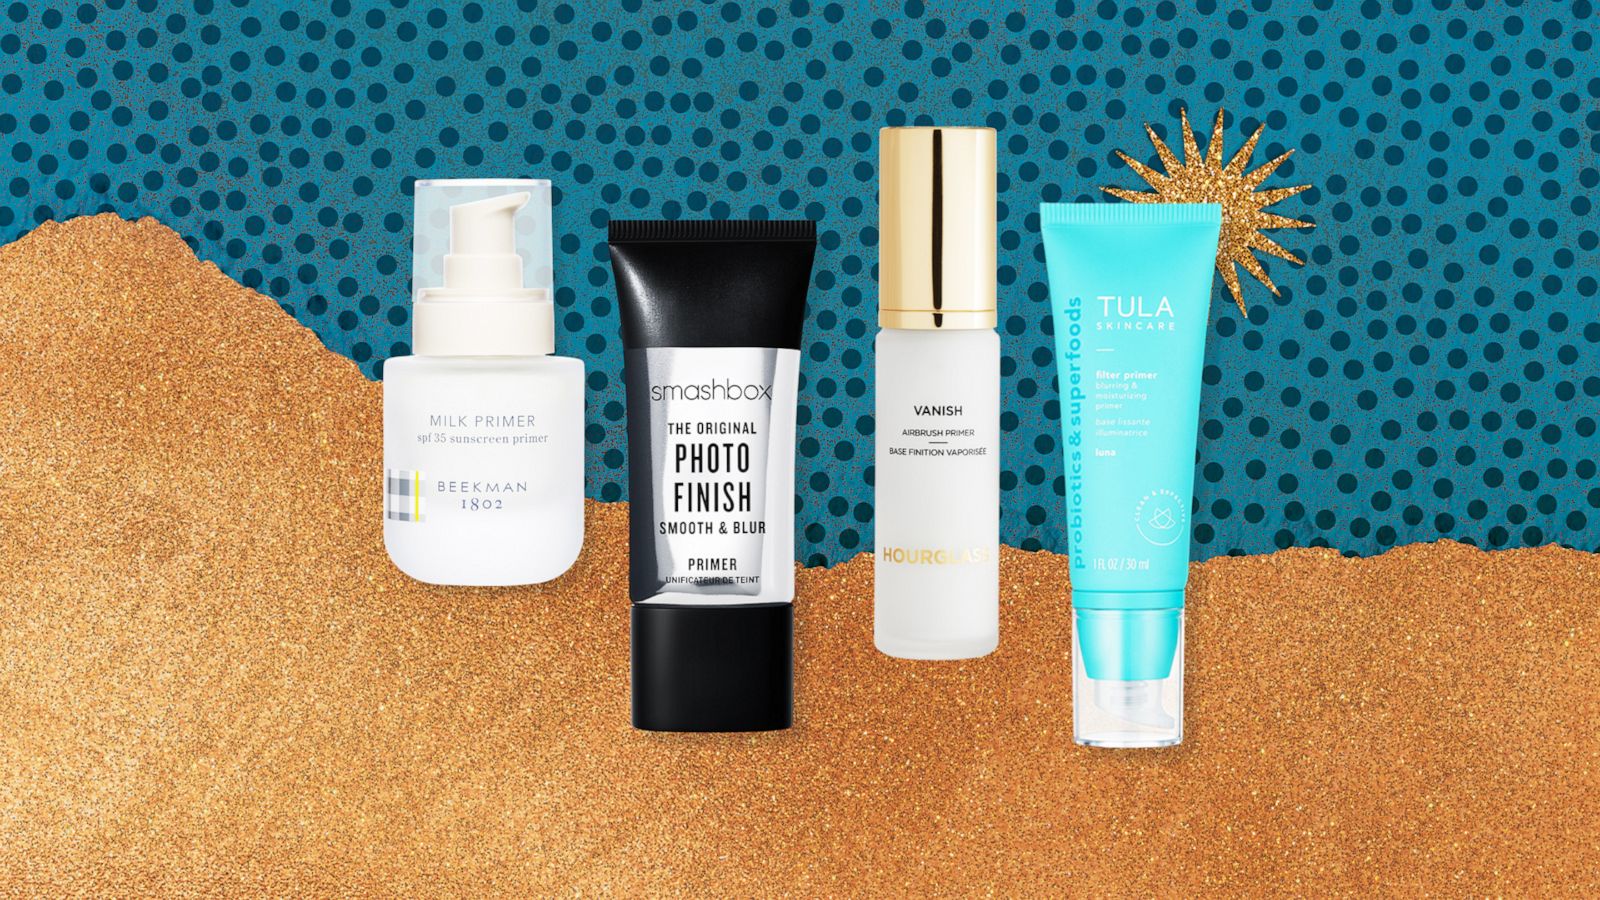 7 primers to help makeup the summer heat and humidity - Good America